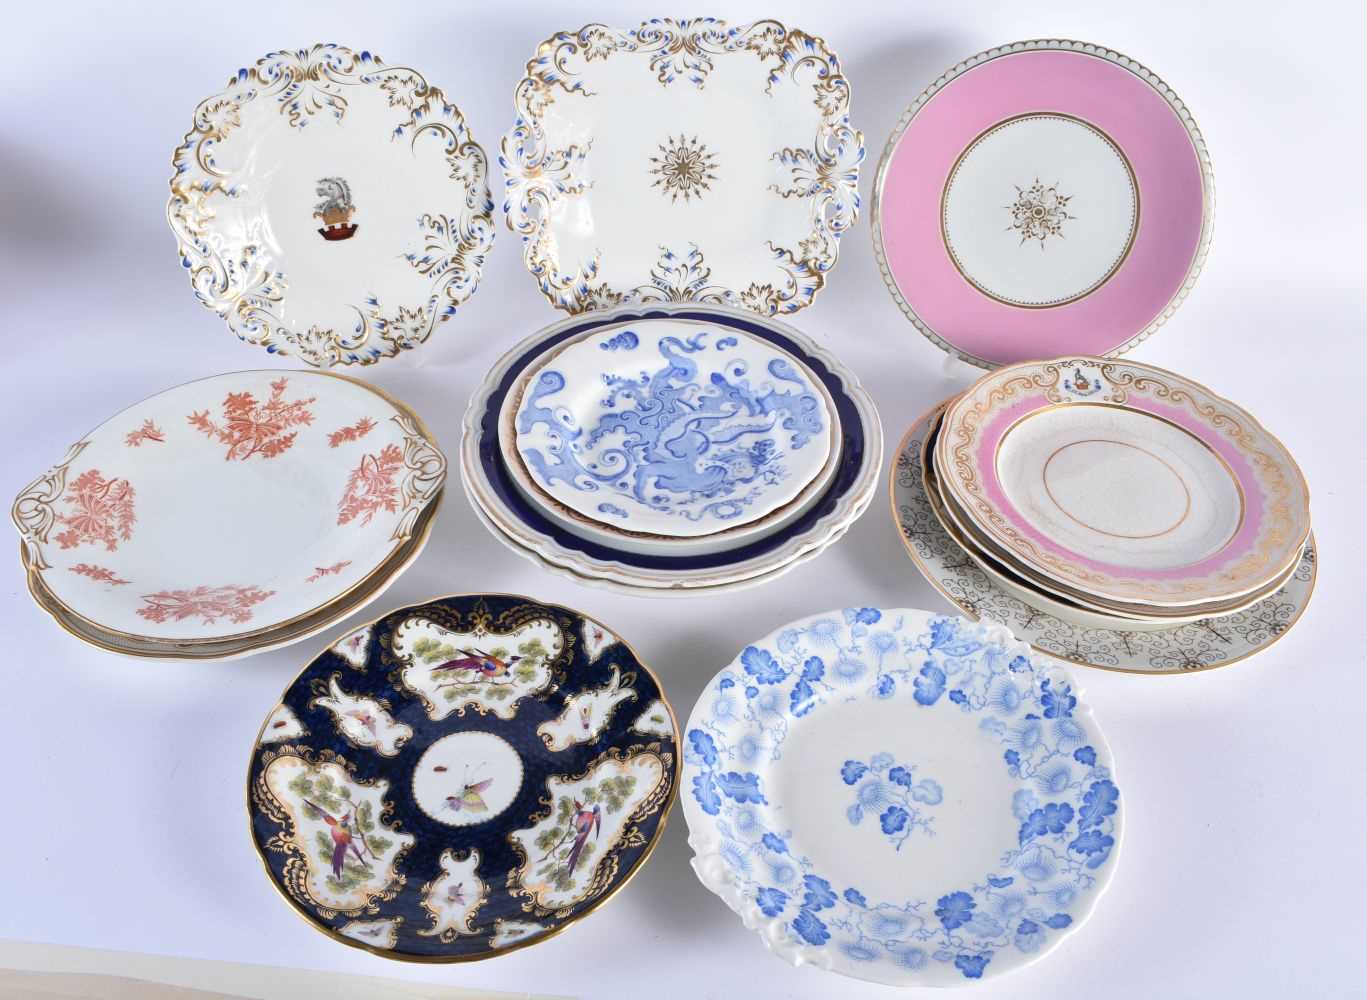 A COLLECTION OF 19TH CENTURY ENGLISH PORCELAIN PLATES in various forms and sizes. Largest 26.5 cm